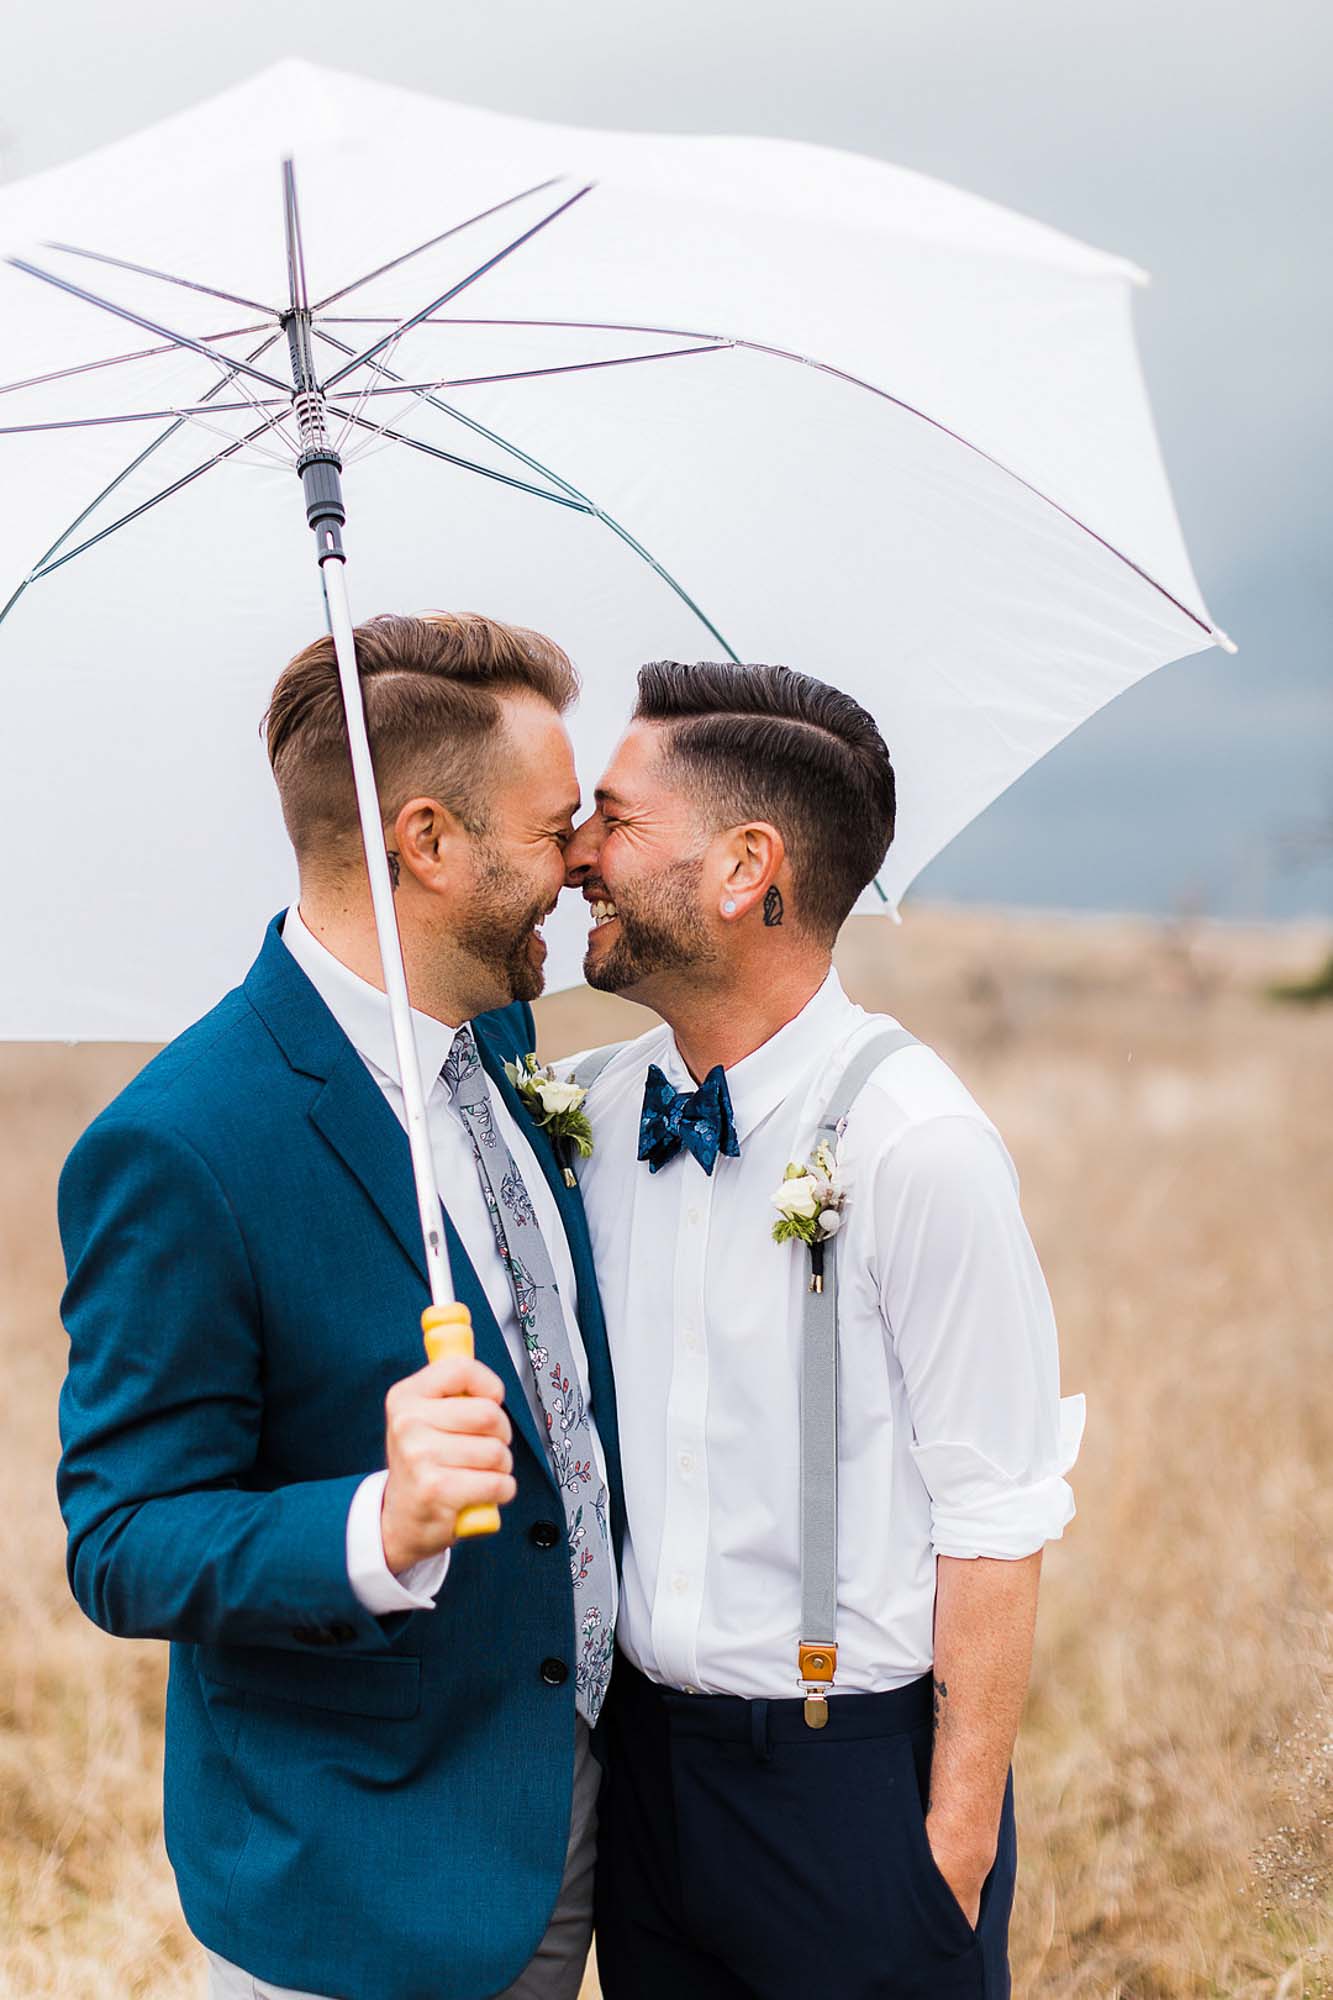 Intimate, tear-filled outdoor Texas wedding | Opal and Onyx Photography | Featured on Equally Wed, the leading LGBTQ+ wedding magazine